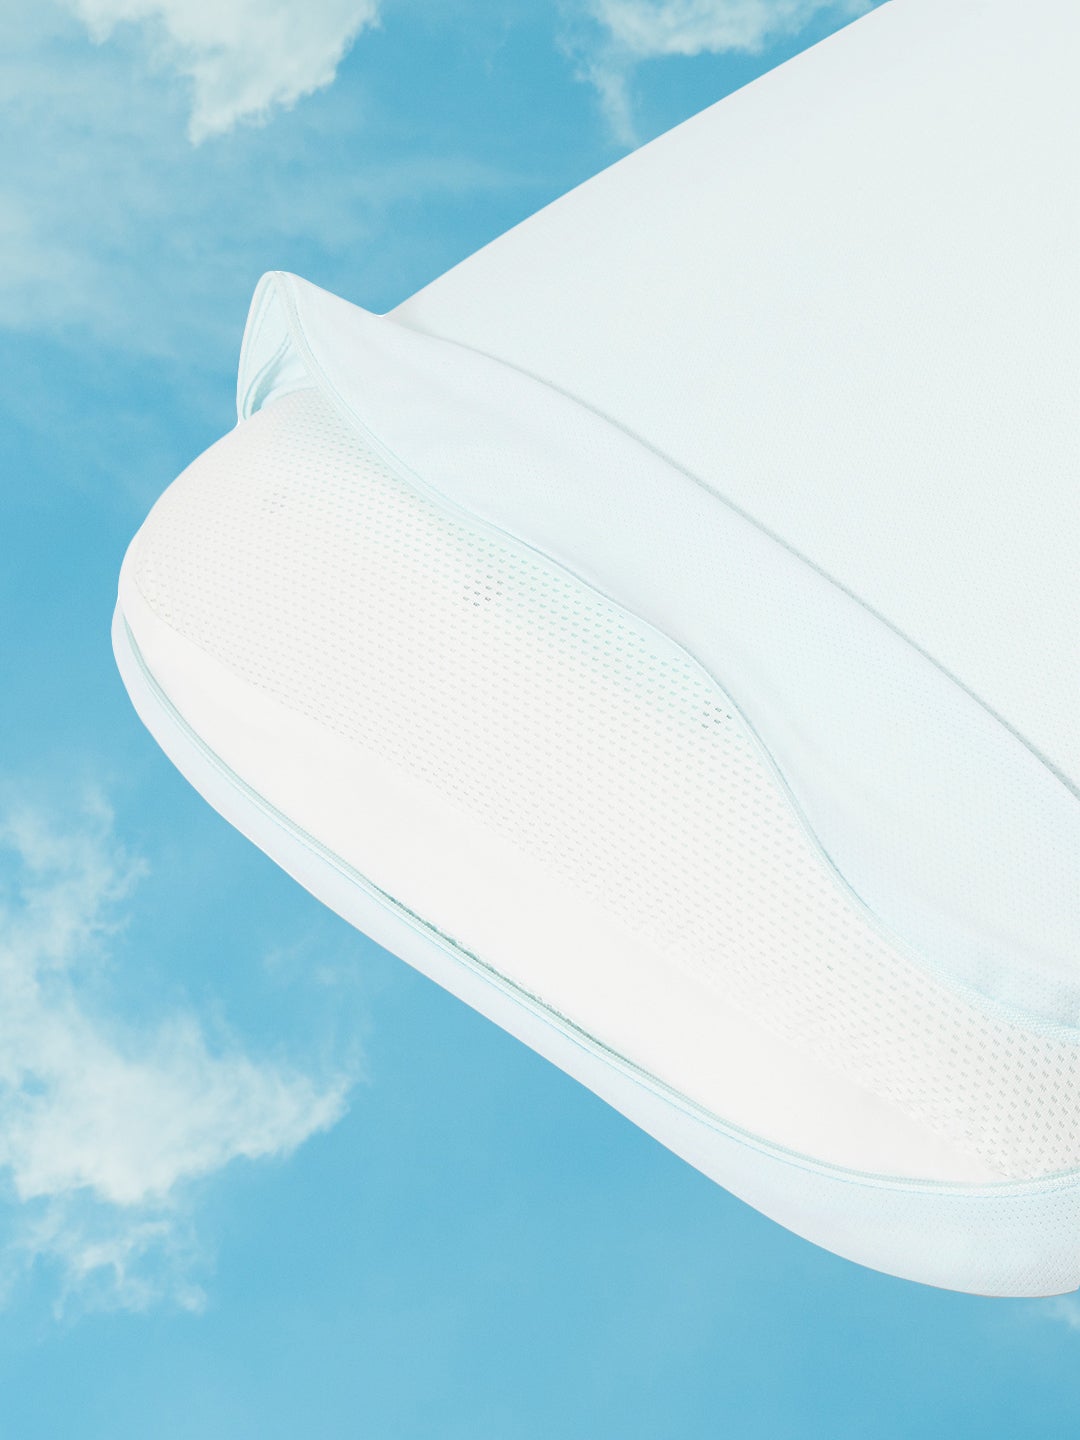 detail shot of Casper hybrid pillow with snow technology's blue cover unzipped on cloudy sky background